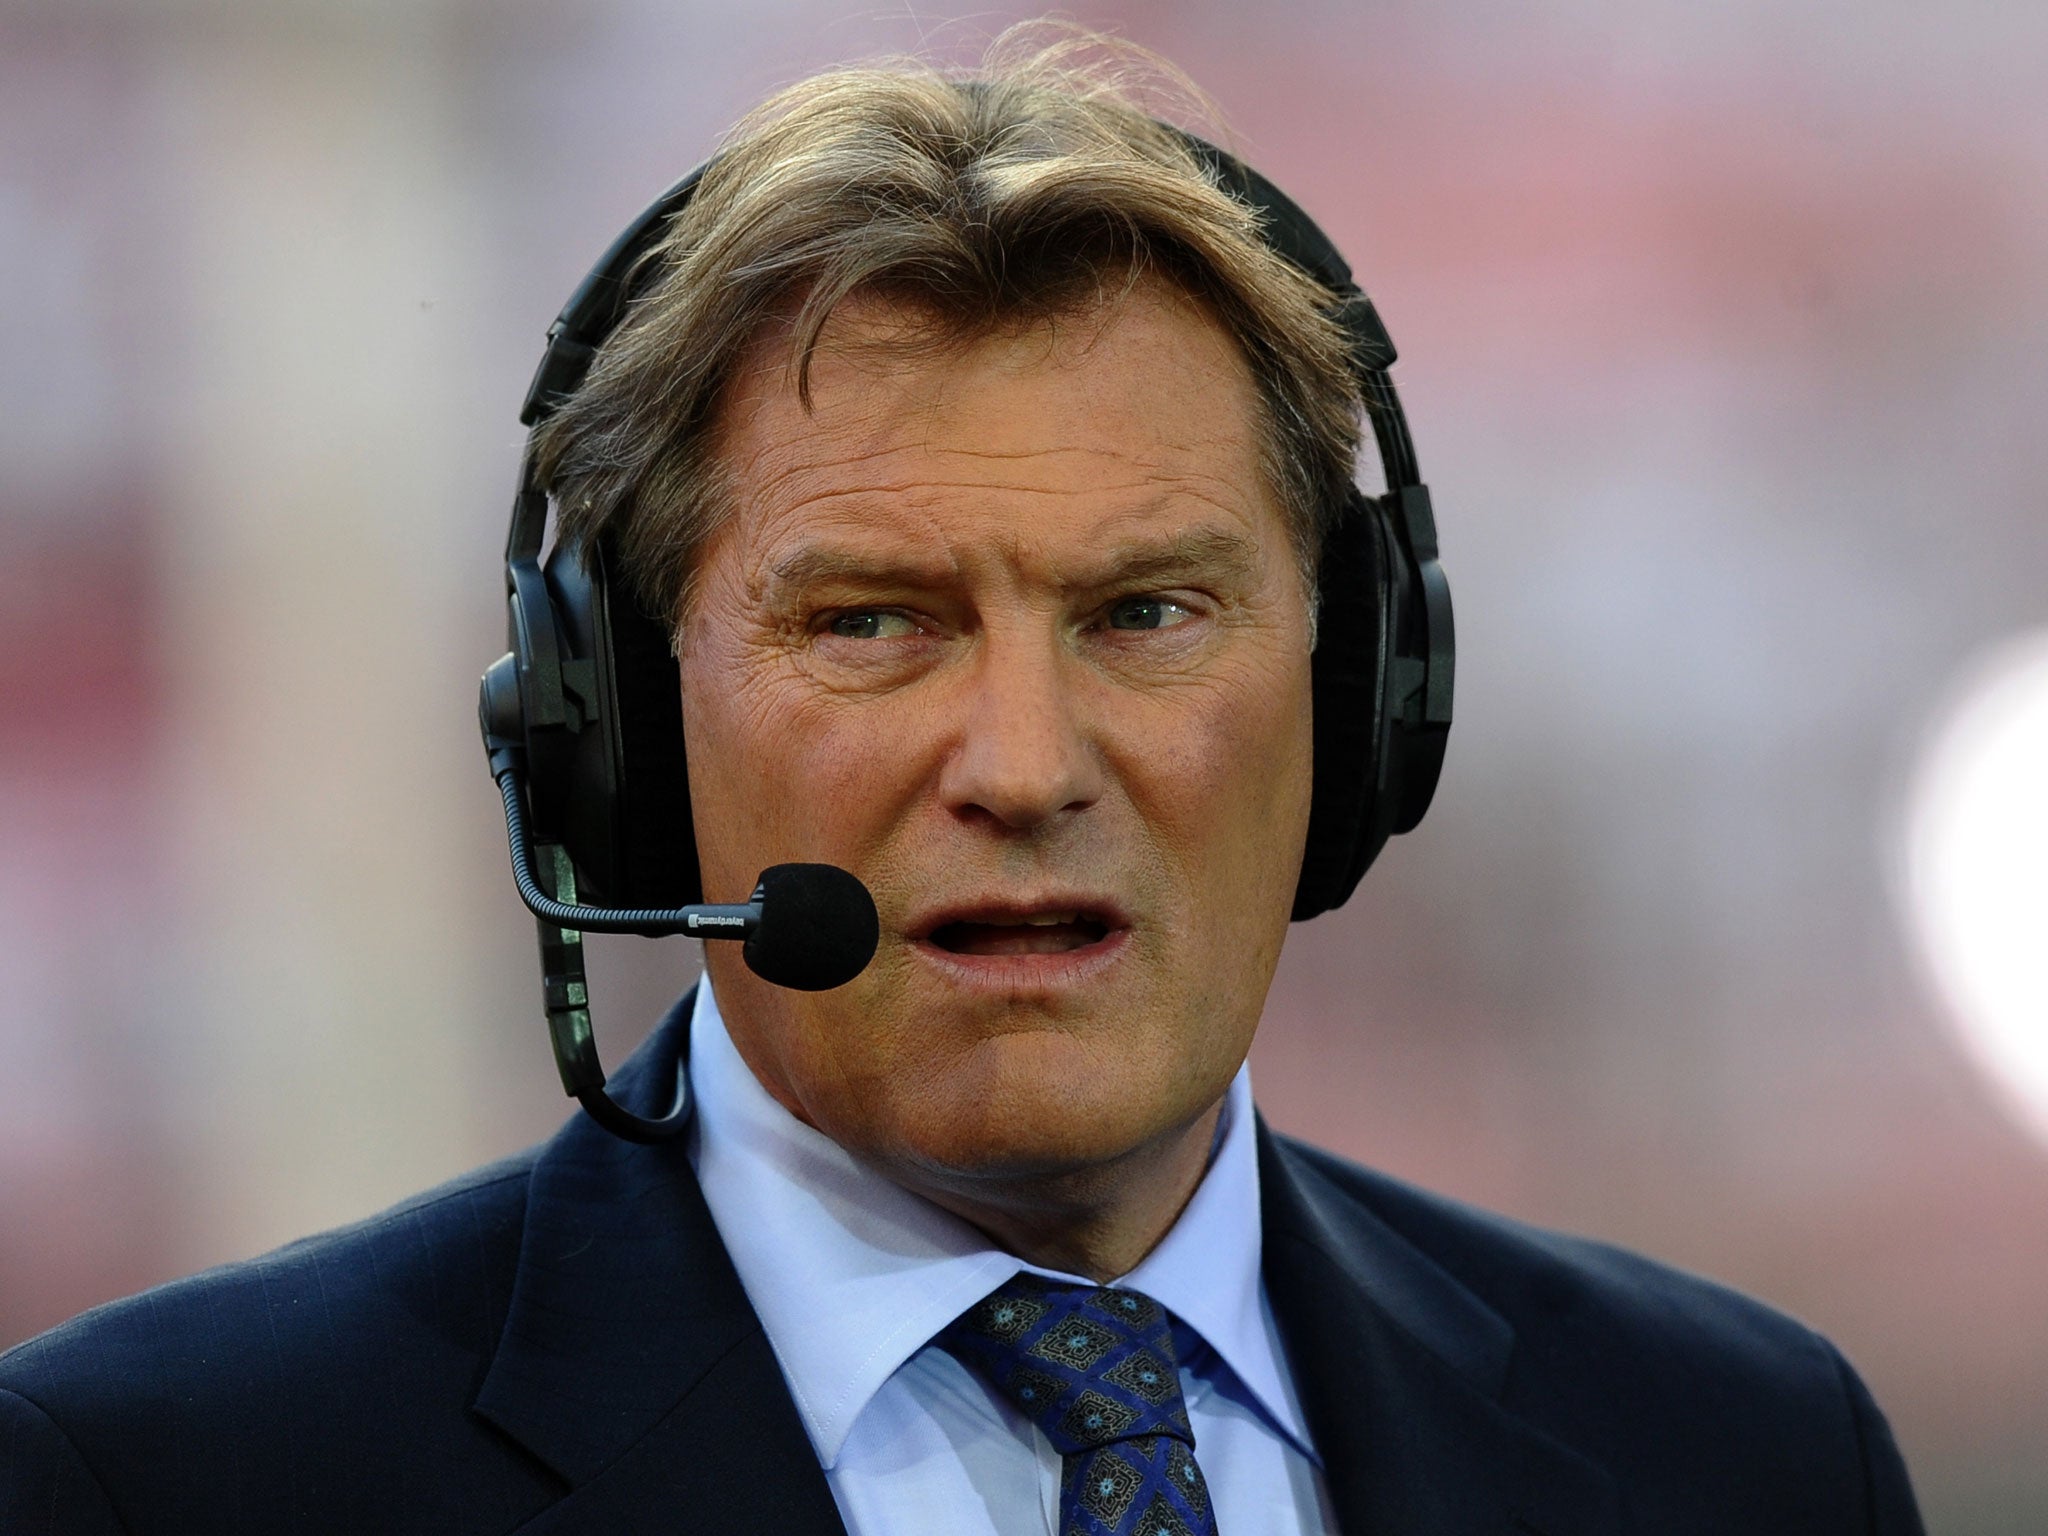 Hoddle will face questions about his future